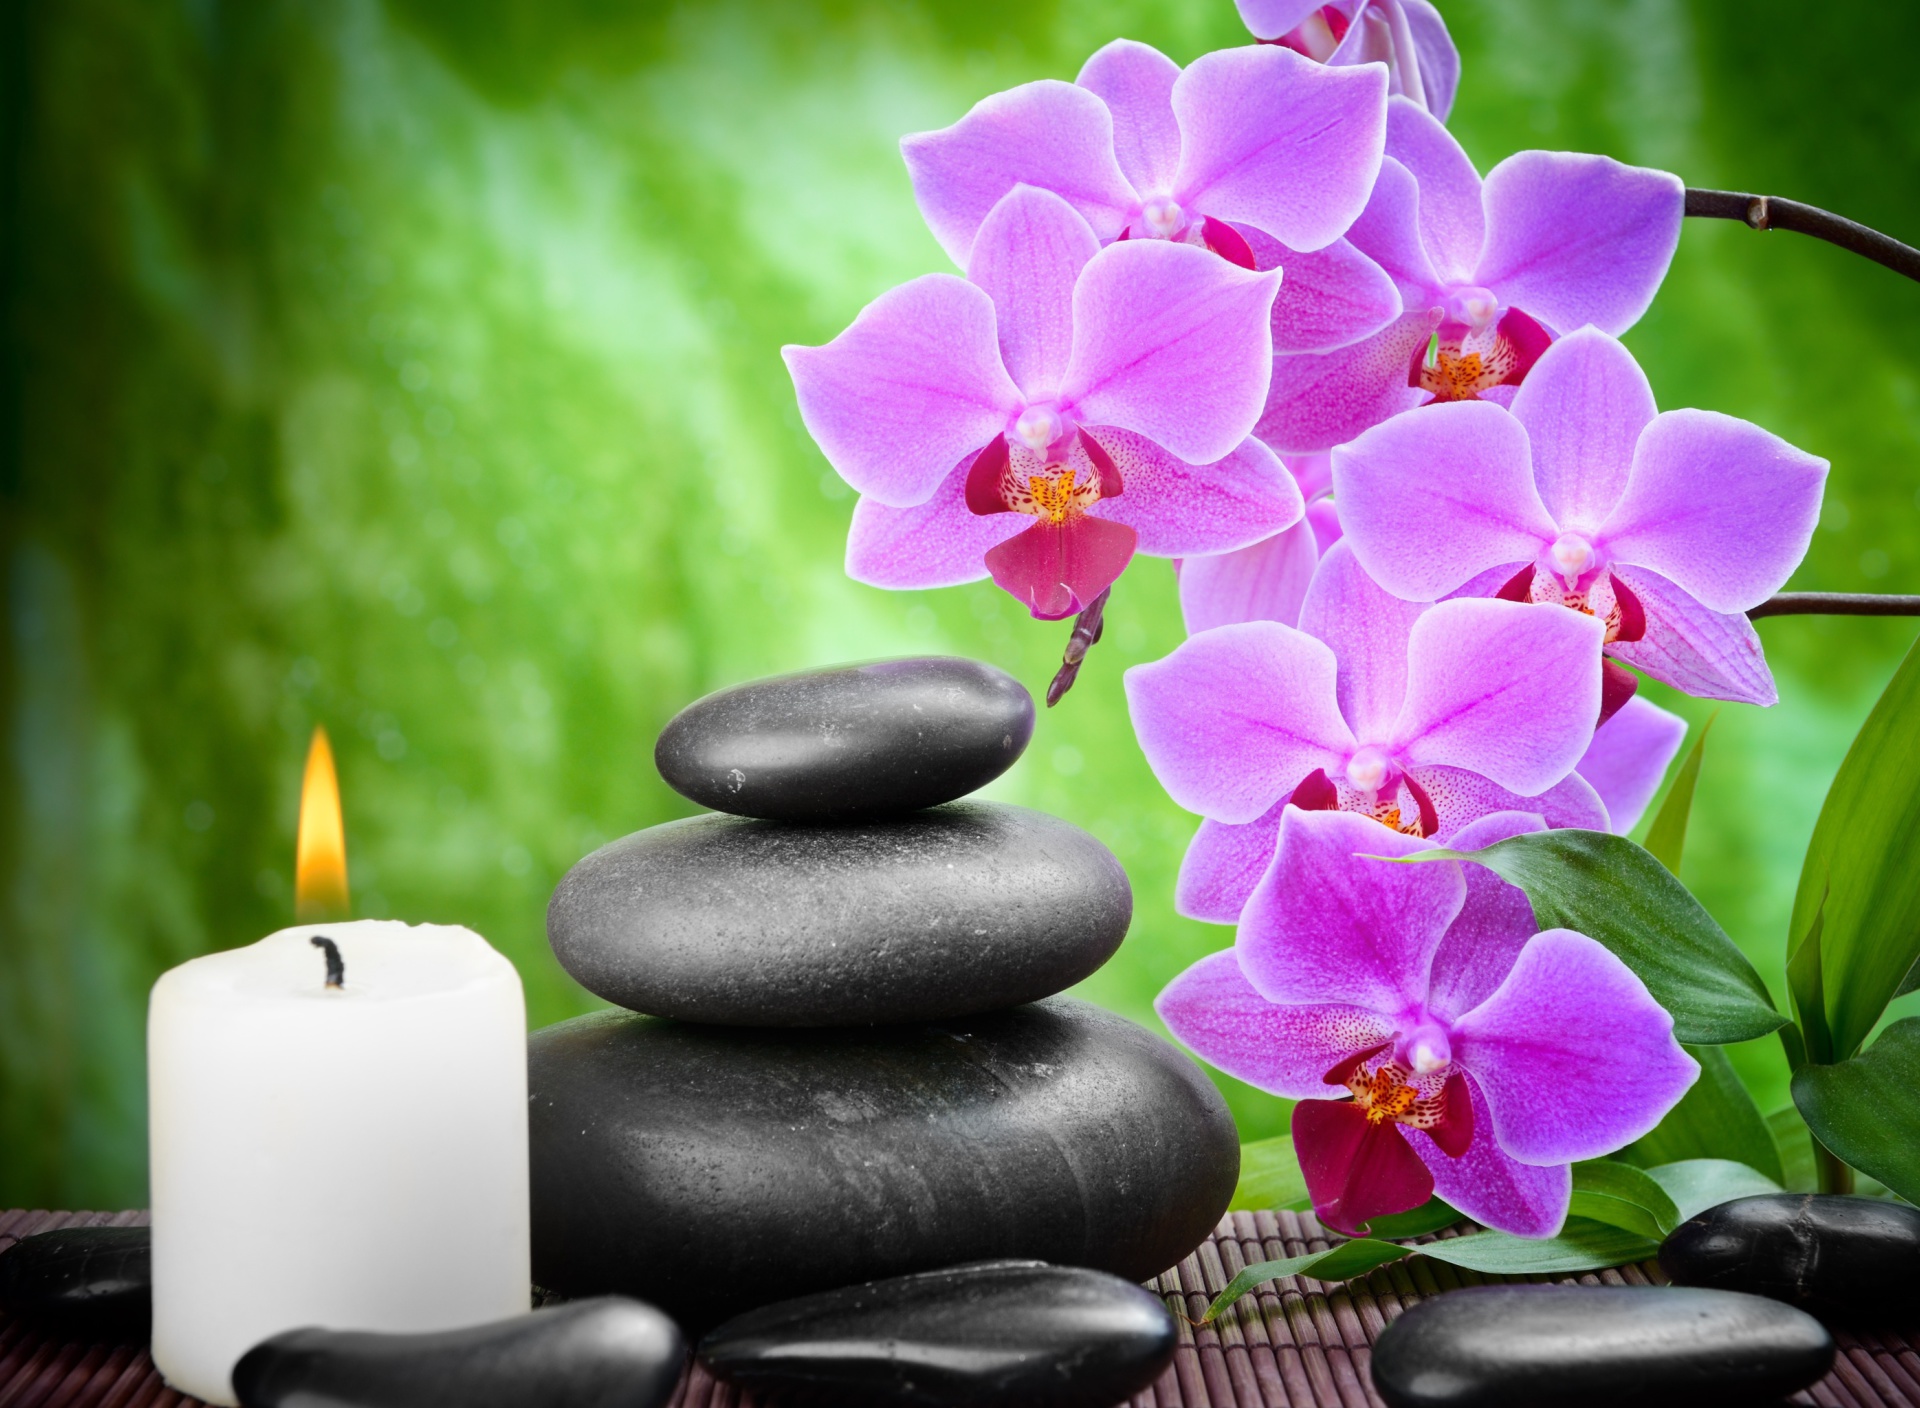 Pebbles, candles and orchids screenshot #1 1920x1408